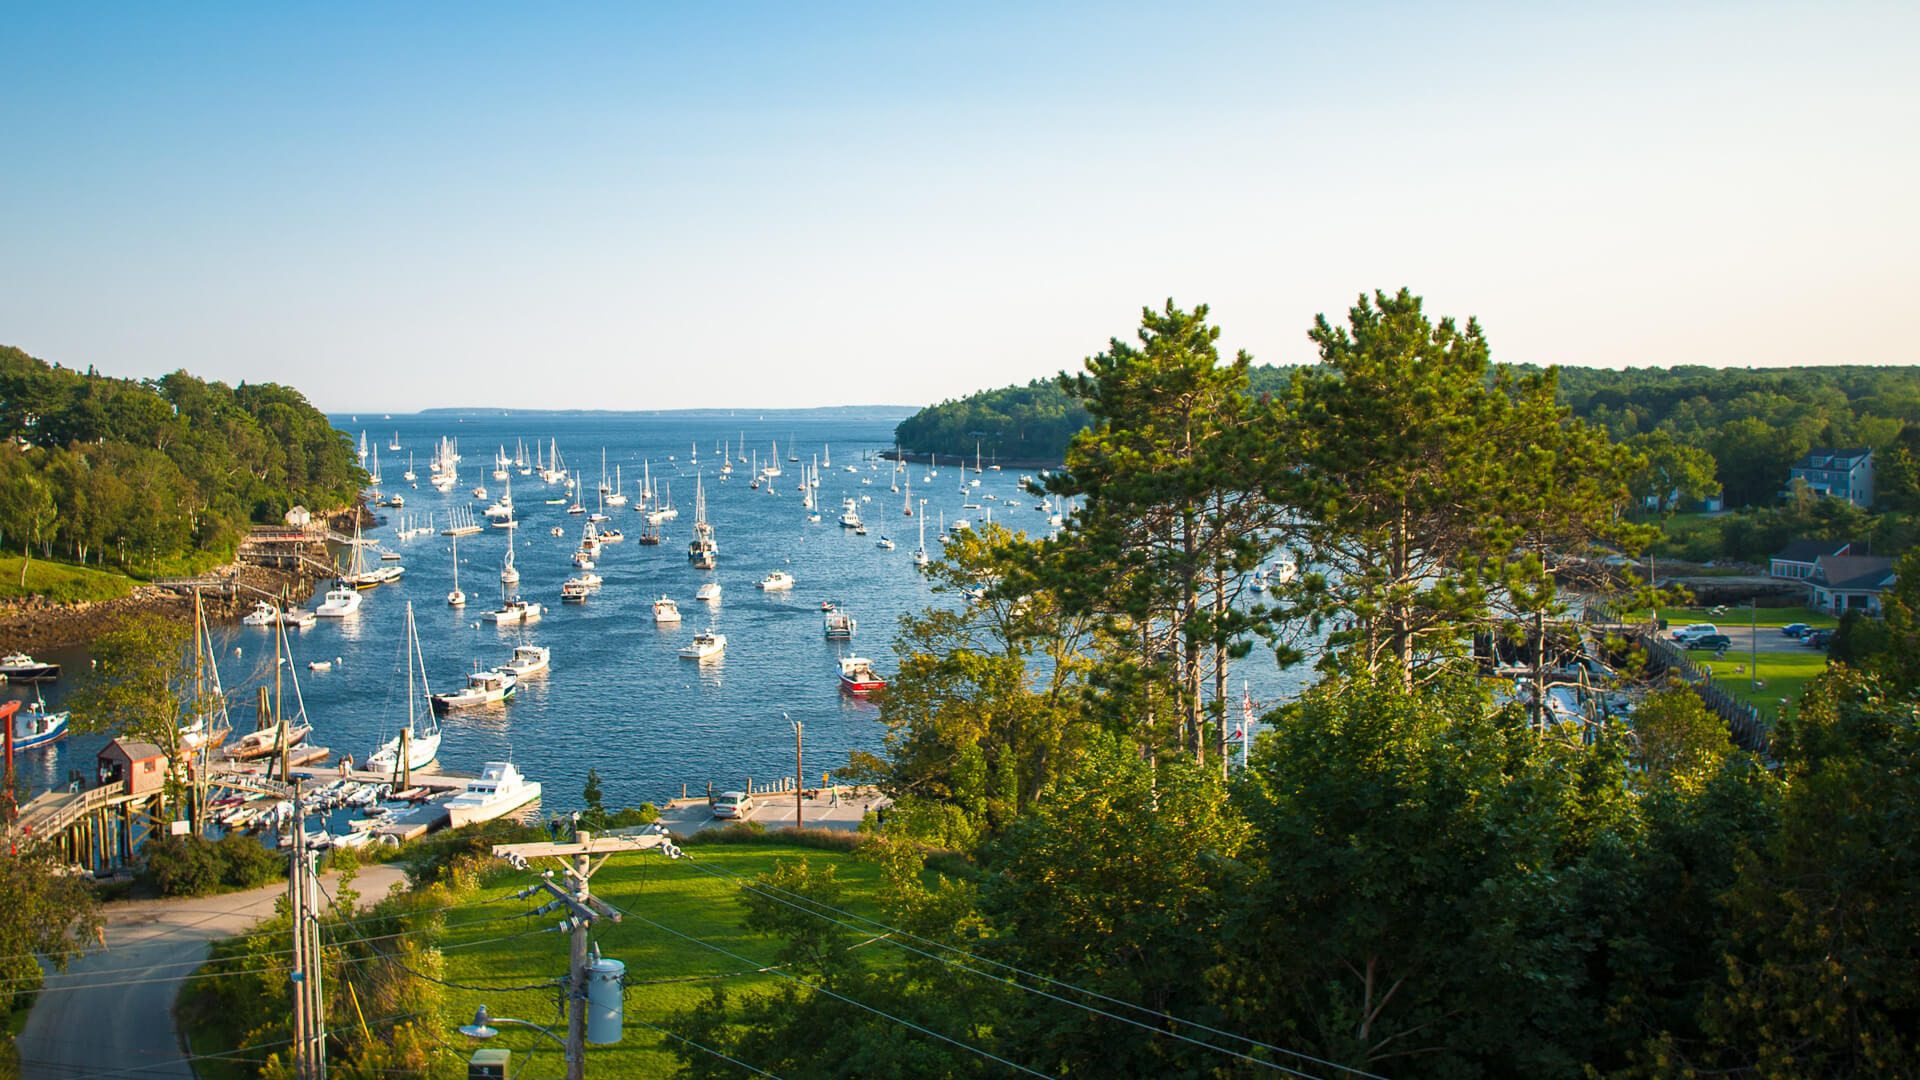 <ul> <li>Average home price: $337,000.</li> </ul> <p>Rockland dishes up a delectable blend of culinary attractions and cultural richness. This bustling seaport town provides an unrivaled opportunity to taste fresh seafood delicacies and delve into the fascinating world of Maine's thriving lobster industry.</p> <p>But the allure of Rockland extends beyond its culinary prowess. The town also hosts a vibrant arts scene, with a bustling calendar of festivals, a thriving community of artists and the renowned Farnsworth Art Museum, making it a hot spot for cultural enthusiasts in the heart of a maritime haven.</p> <p><strong>Learn More: <a href="https://www.gobankingrates.com/investing/real-estate/housing-market-home-prices-plummeting-in-10-formerly-overpriced-housing-markets/?utm_term=related_link_7&utm_campaign=1269507&utm_source=msn.com&utm_content=14&utm_medium=rss" rel="">Housing Market 2024: Home Prices Are Plummeting in 10 Formerly Overpriced Housing Markets</a></strong></p>